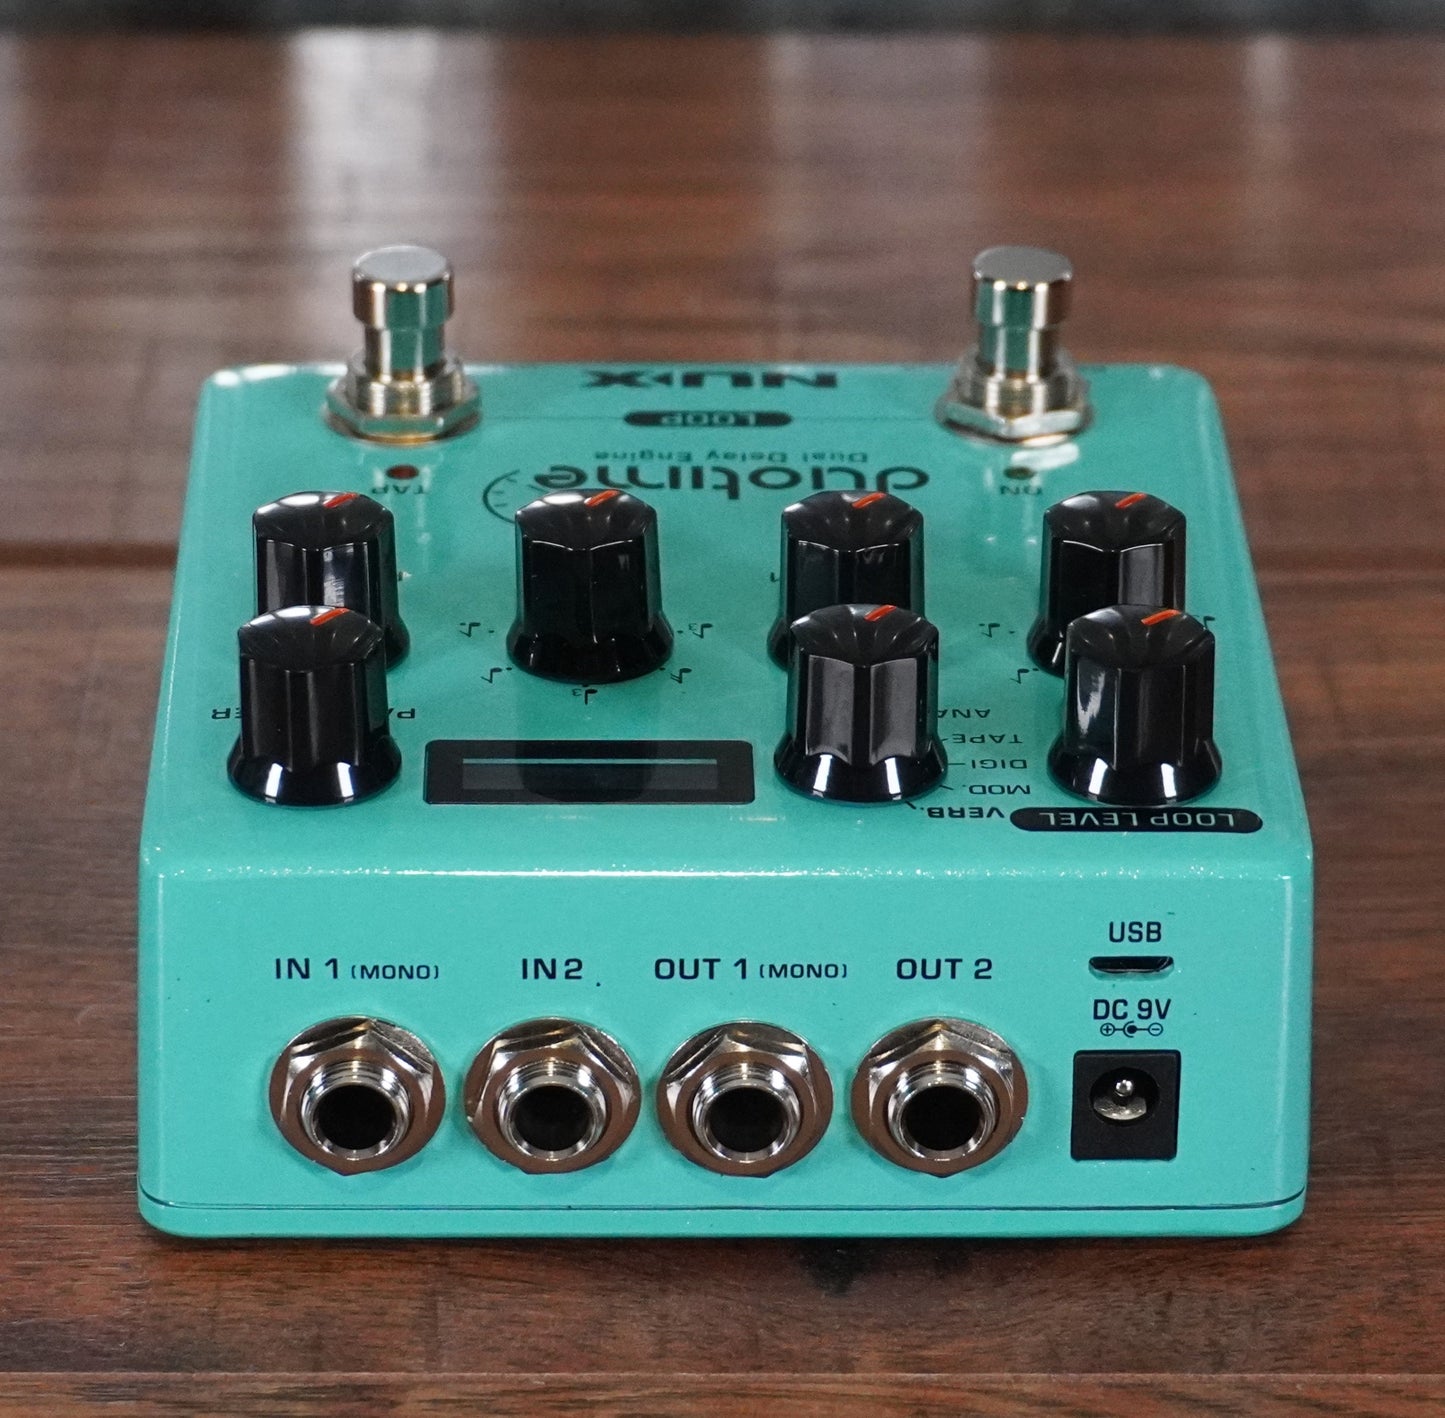 NUX NDD-6 Duotime Dual Delay Engine Stereo Delay Guitar Effect Pedal